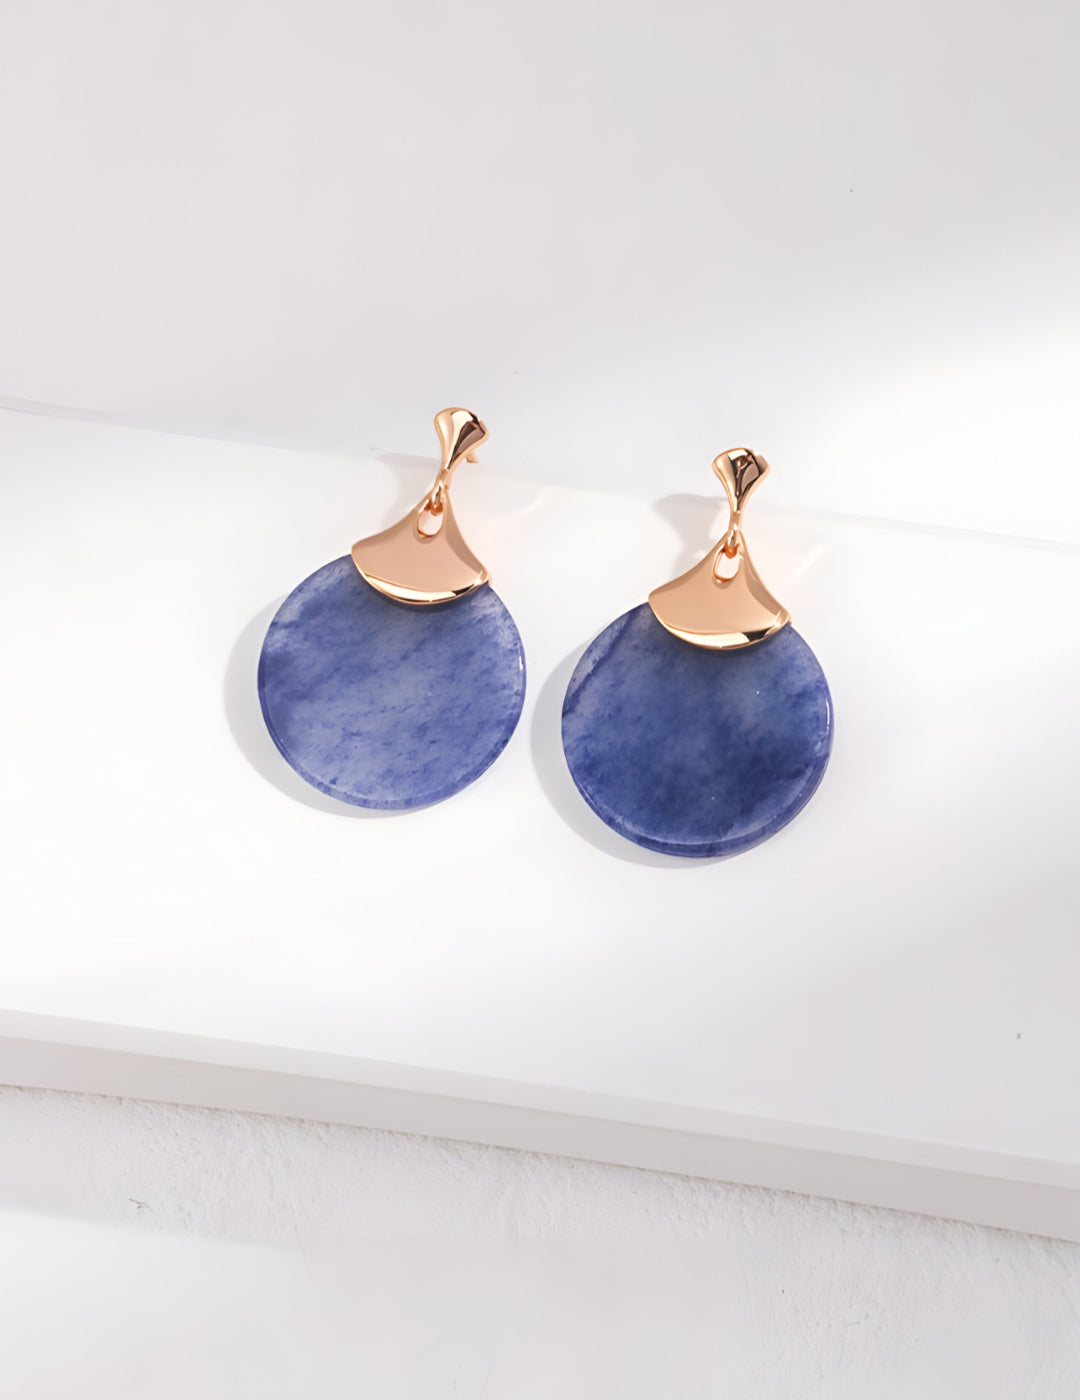  Serenity in Blue - Sterling Silver Dongling Jade Earrings - S925 sterling pure silver - 18K Gold Vermeil